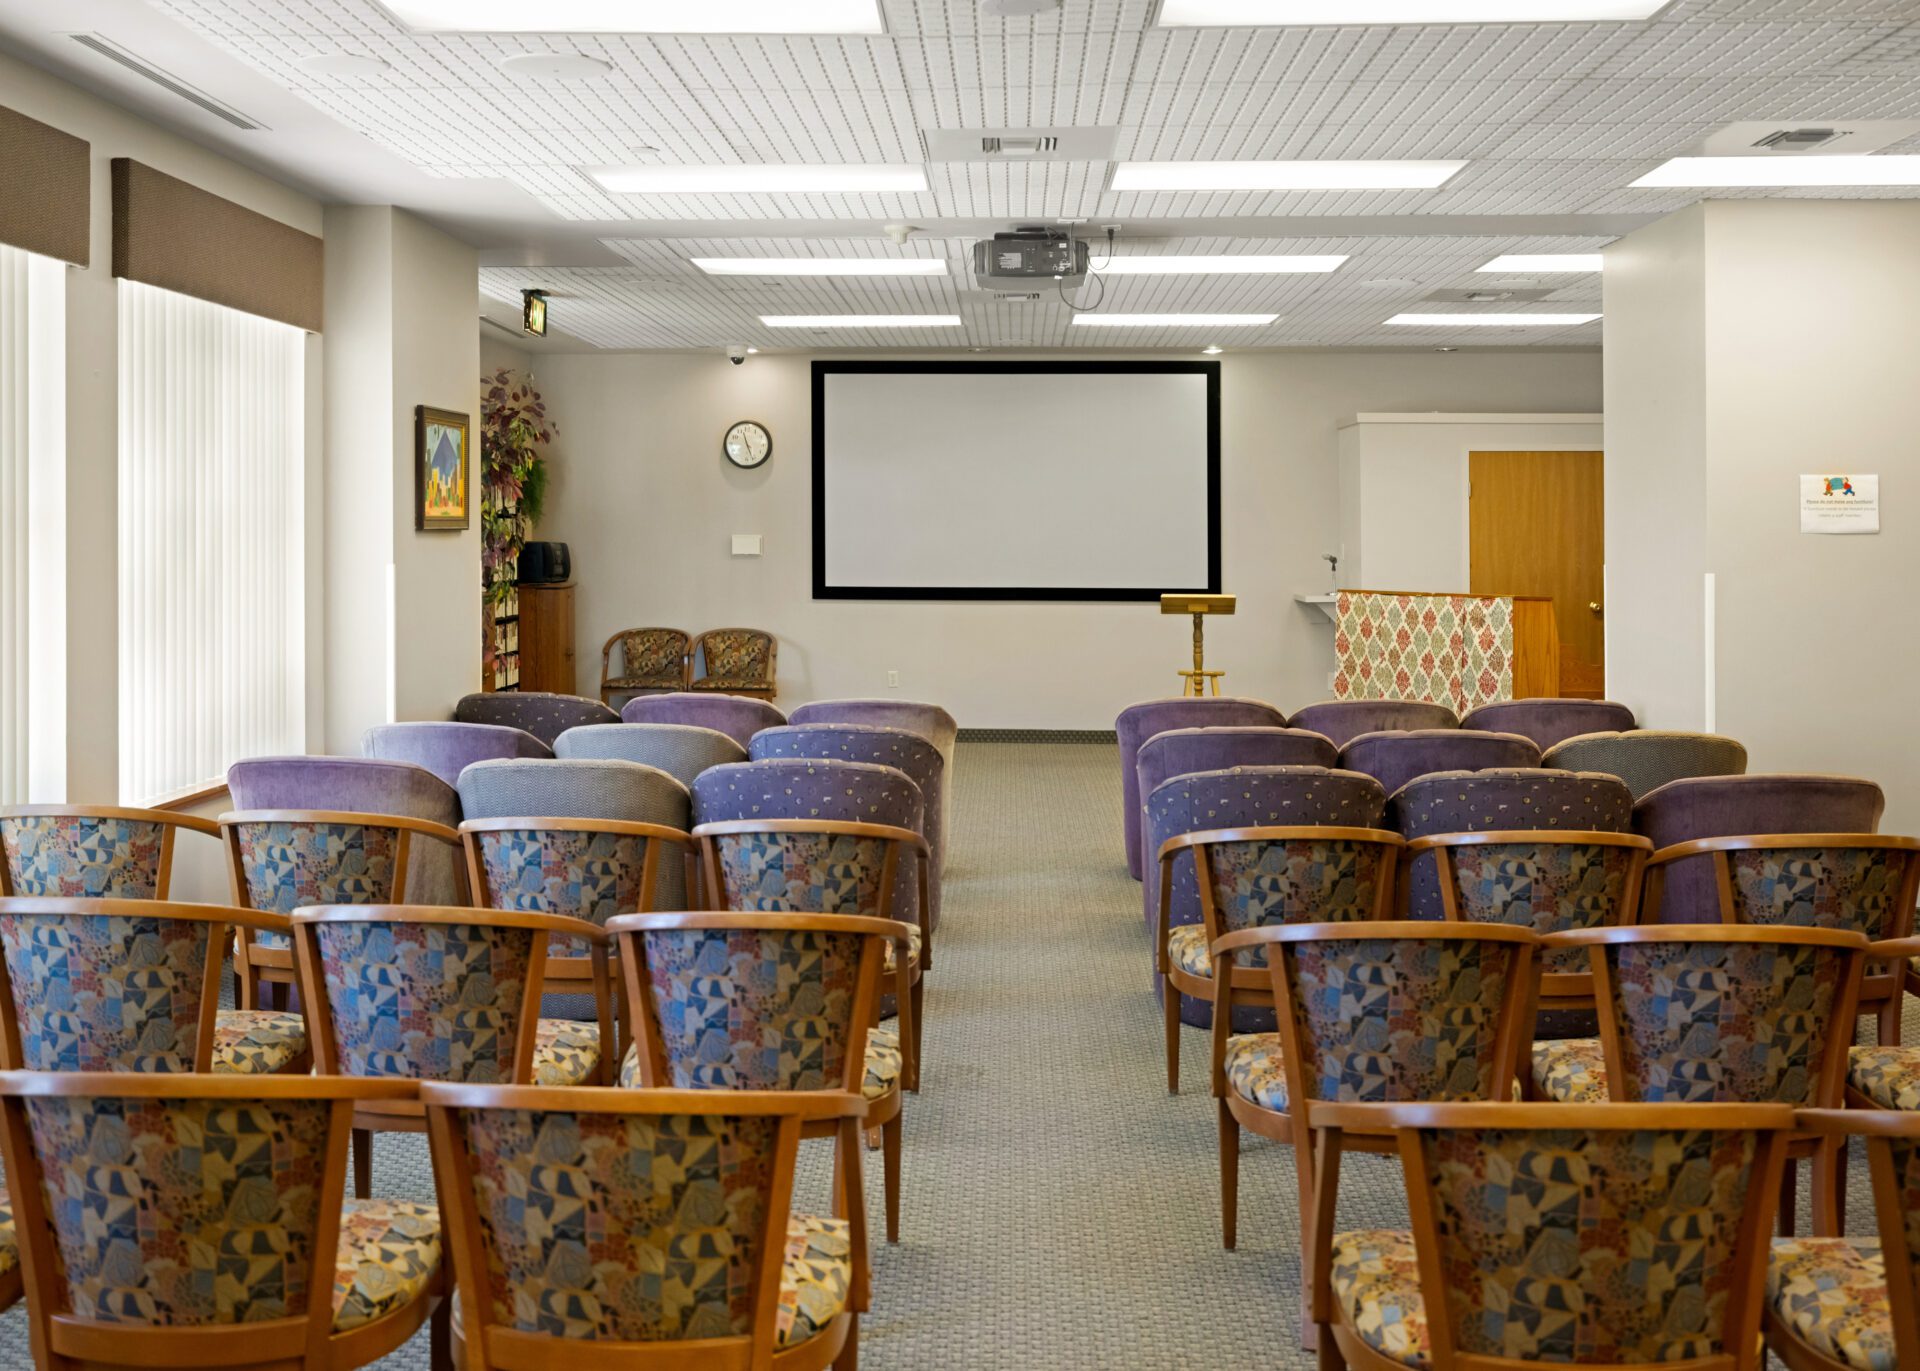 a conference room with rows of chairs and a projector screen